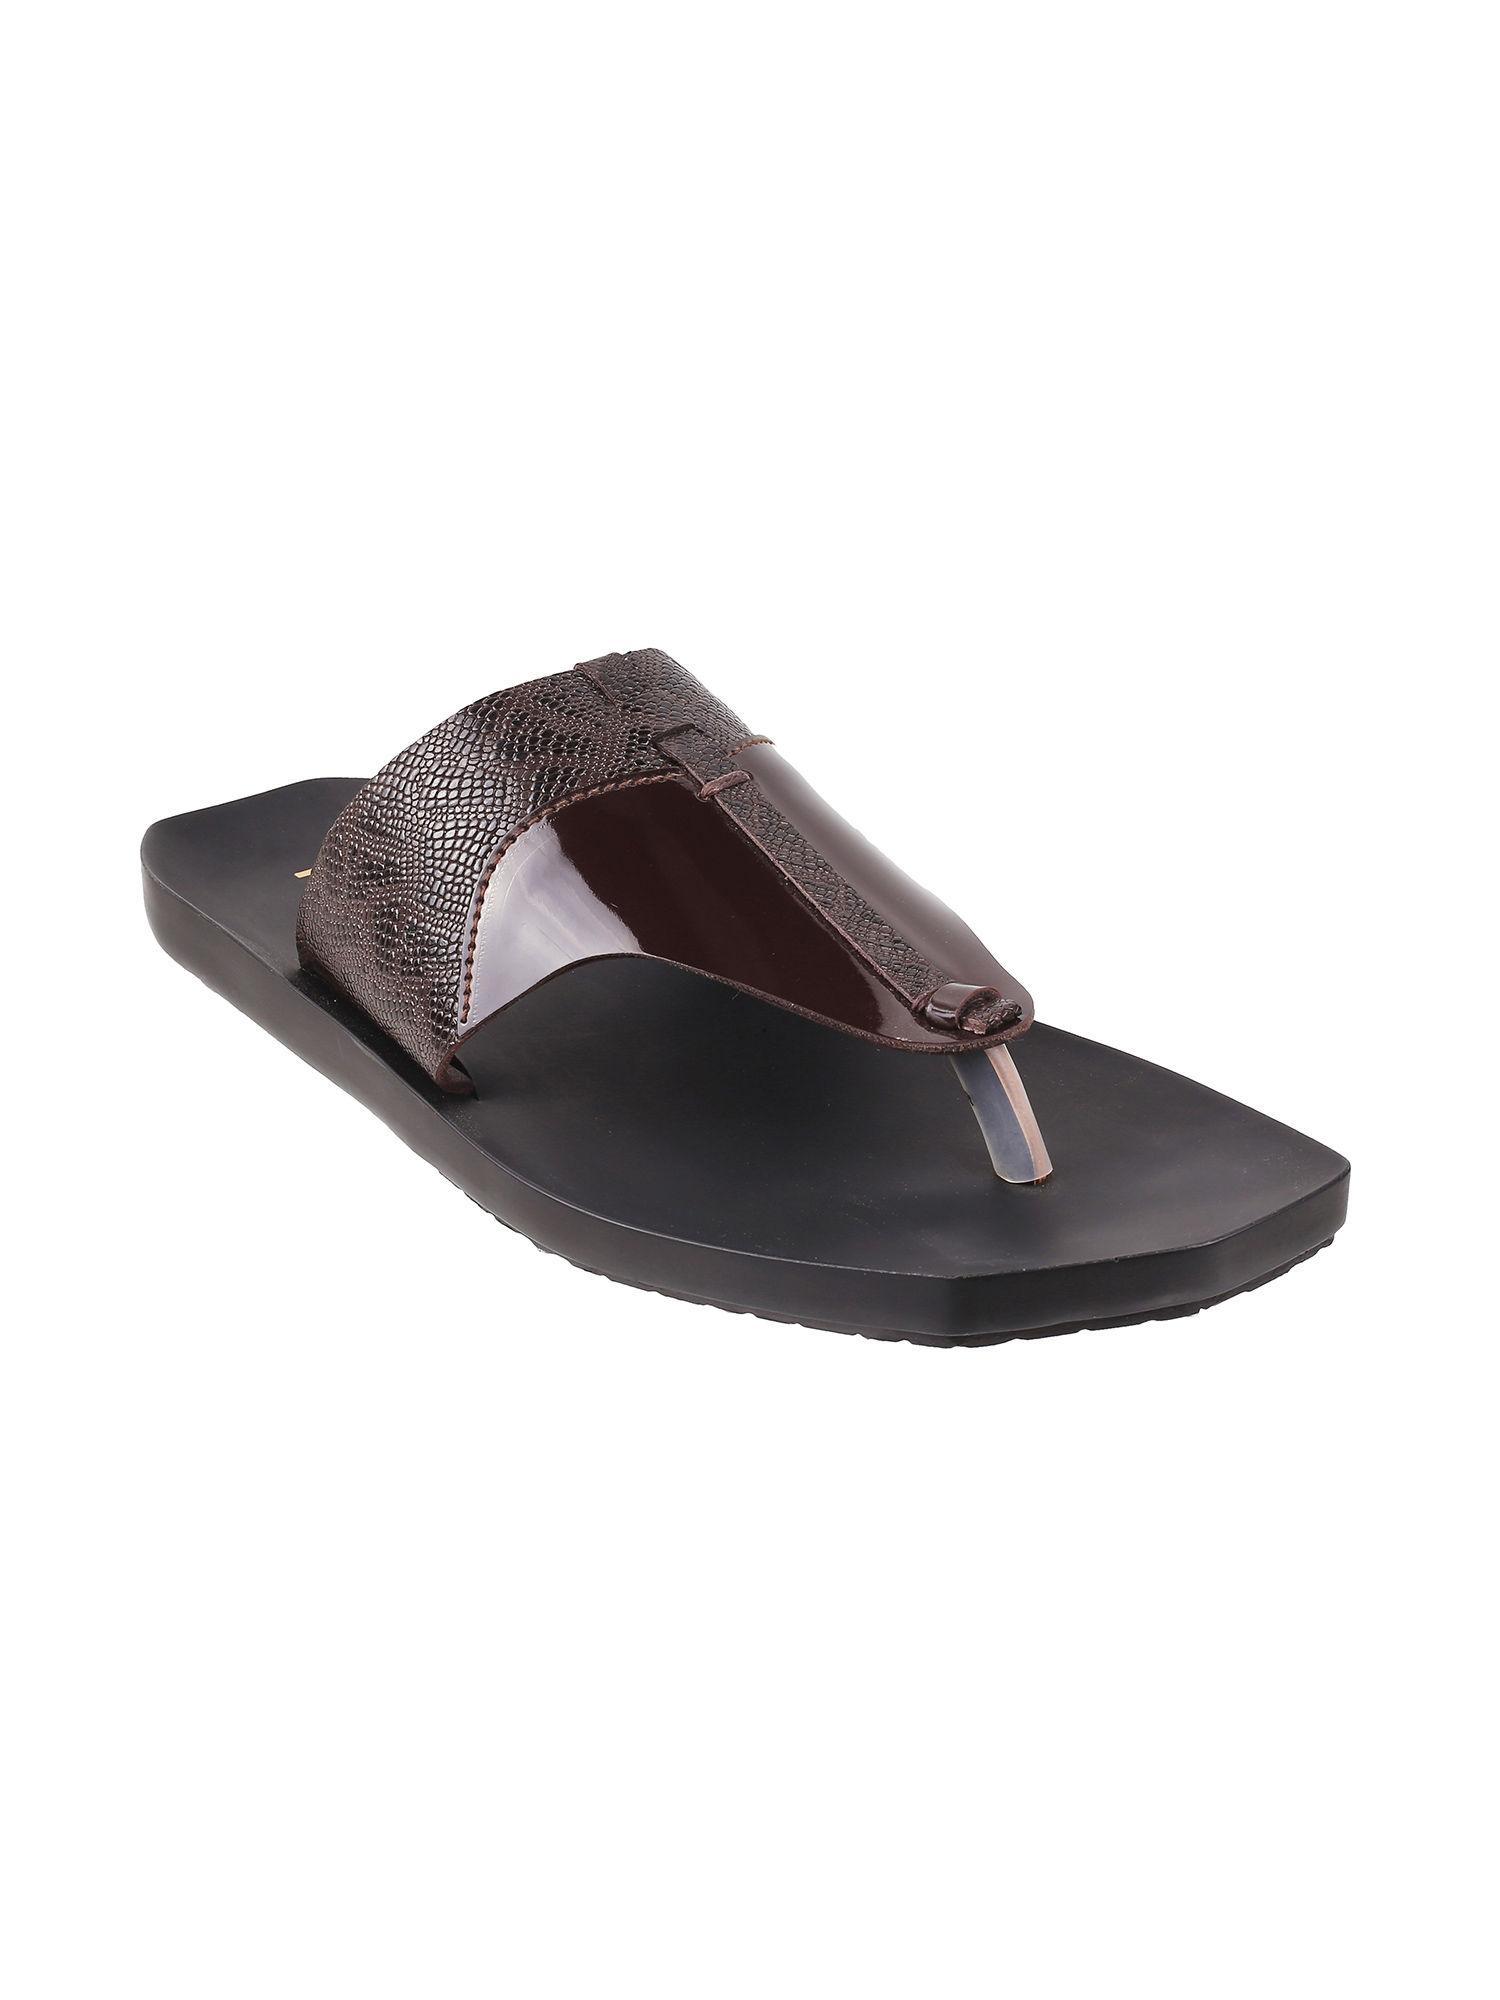 men leather brown slippers